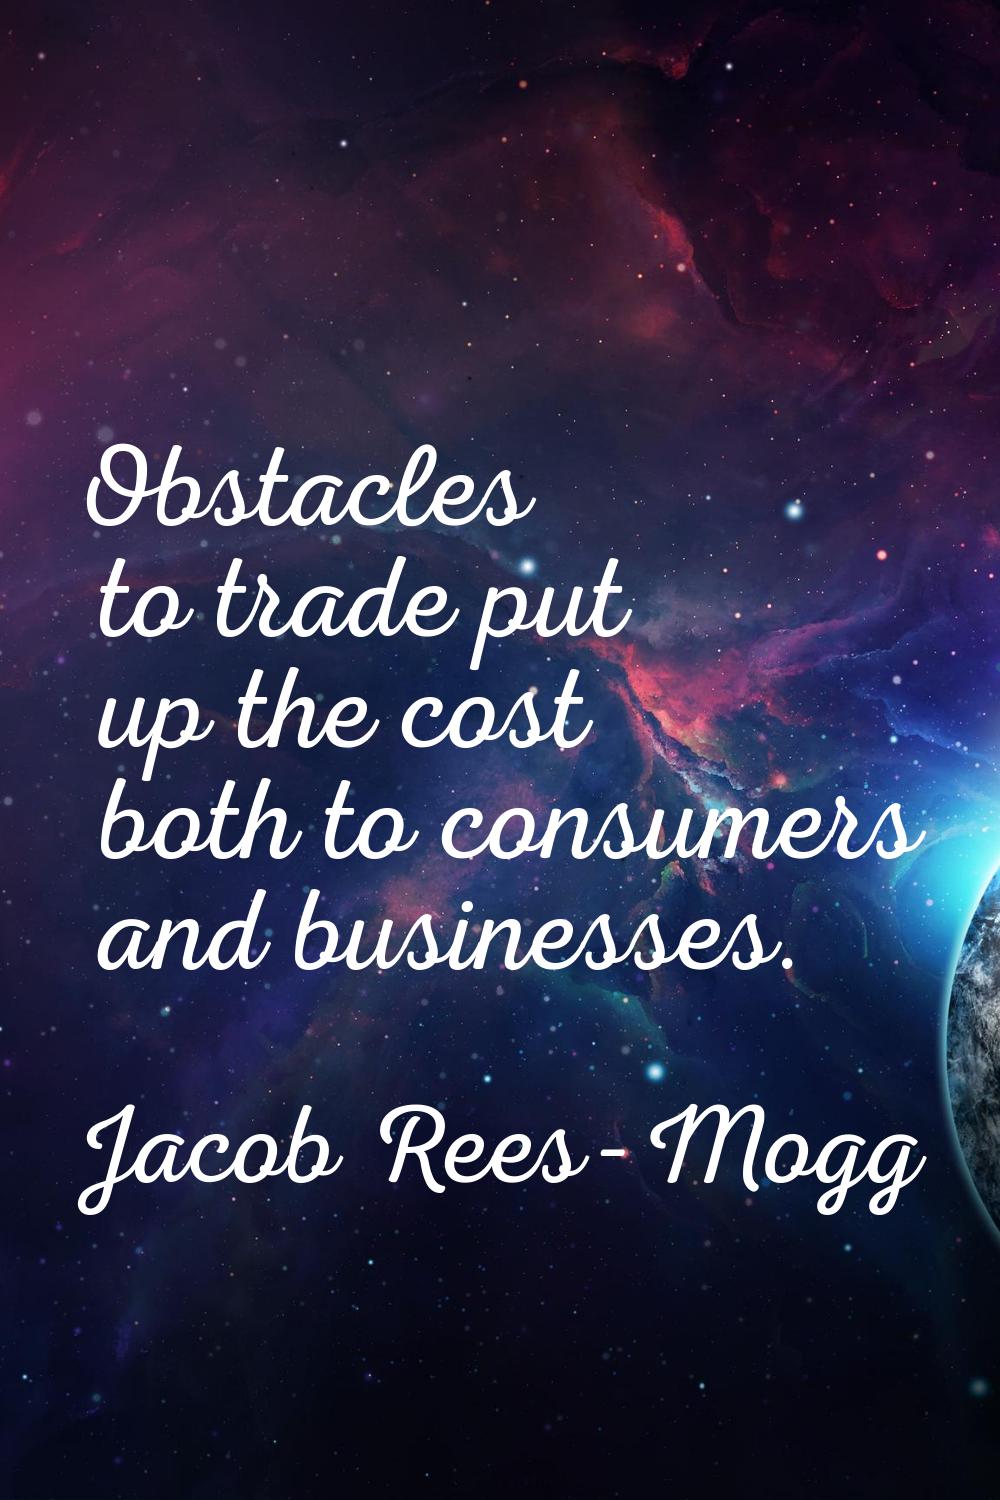 Obstacles to trade put up the cost both to consumers and businesses.